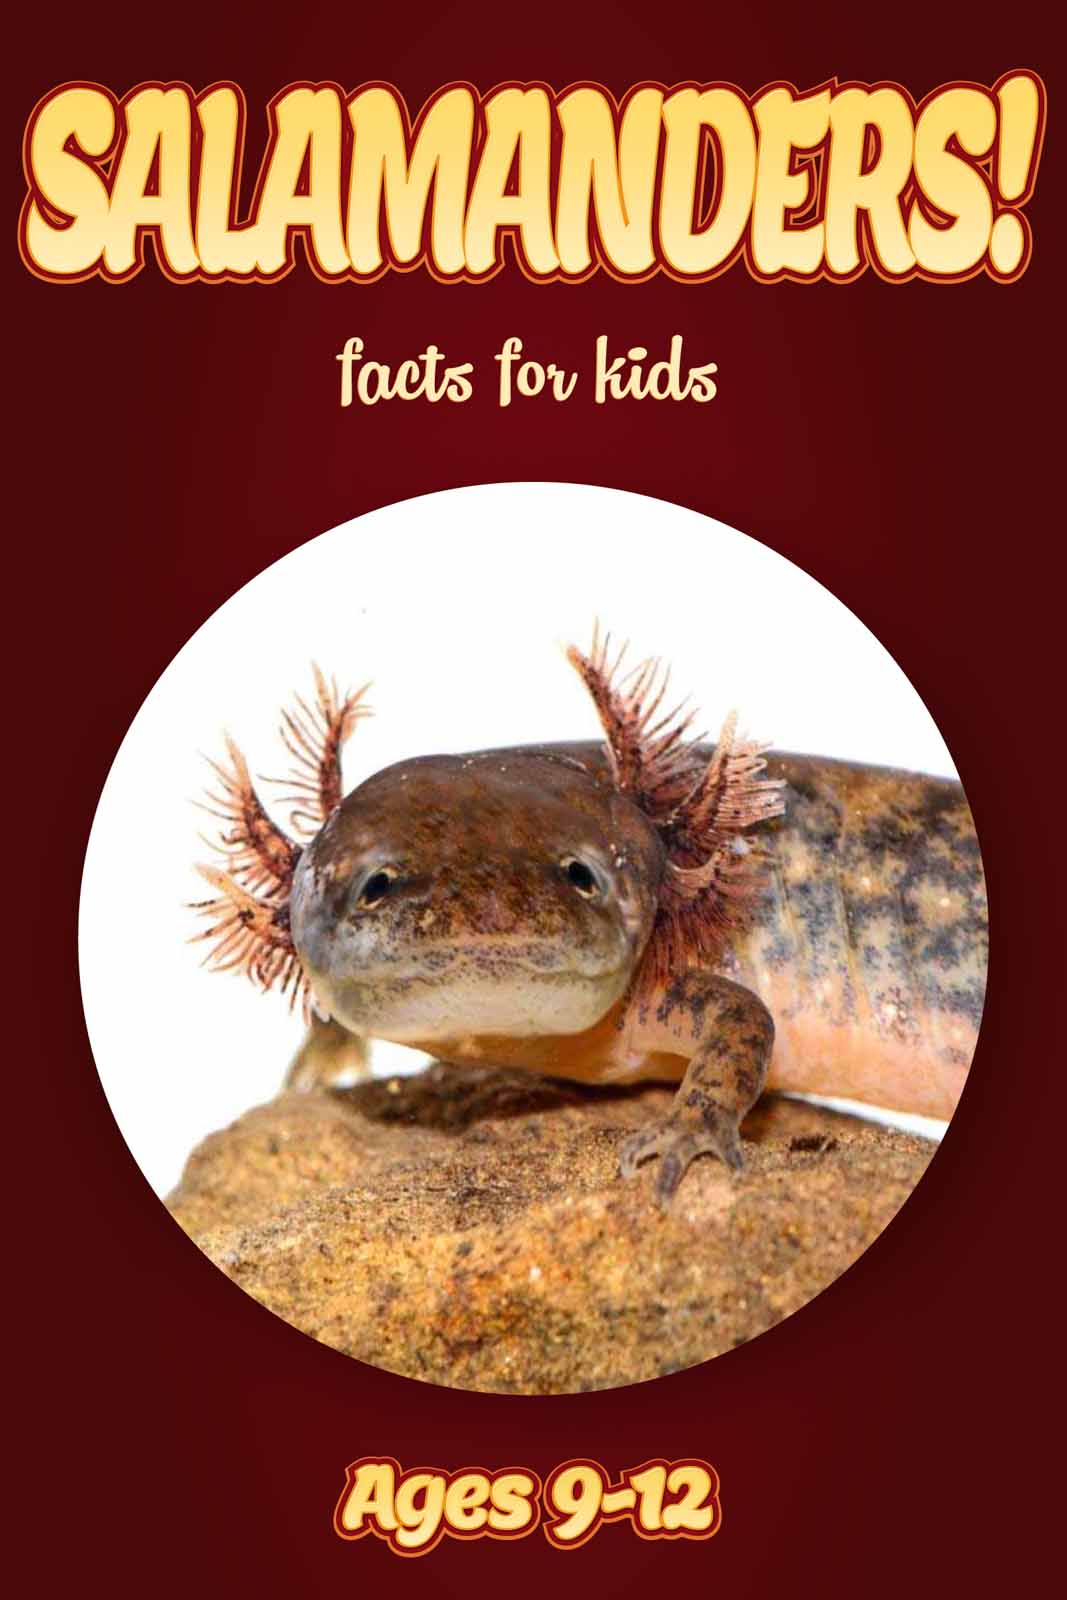 salamander-facts-kids-non-fiction-book-ages-9-12-clouducated